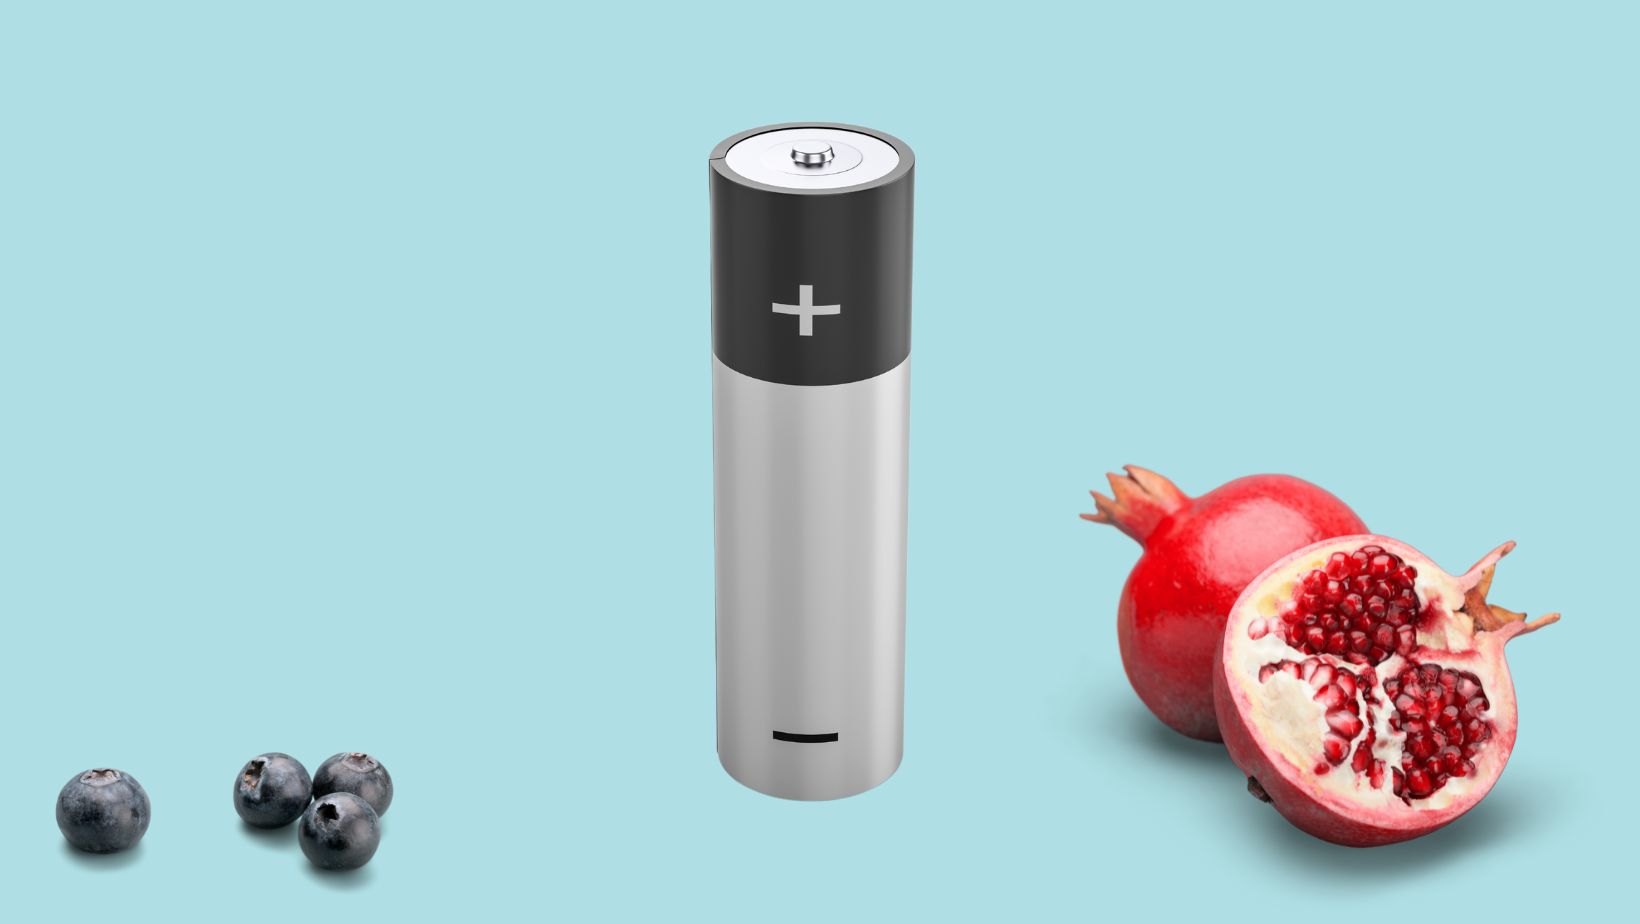 A creative composition with a cylindrical battery standing upright next to a pomegranate cut open to reveal seeds and a cluster of blueberries on a soft blue background, symbolizing natural energy sources juxtaposed with man-made power storage.